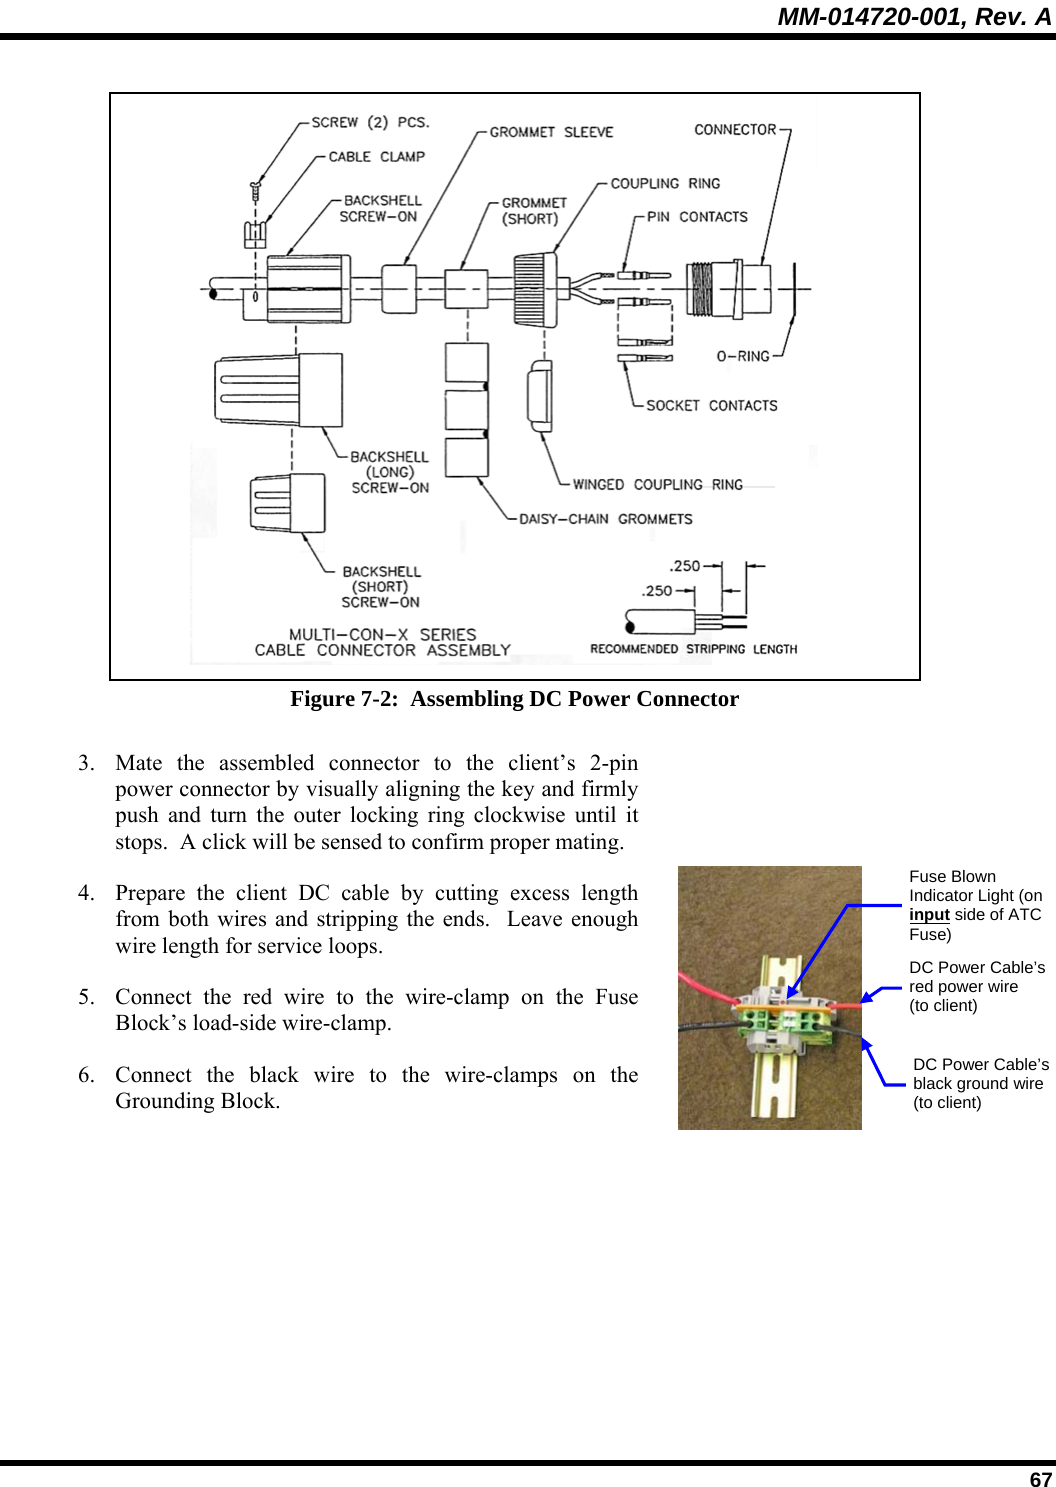 MM-014720-001, Rev. A  67  Figure 7-2:  Assembling DC Power Connector 3. Mate the assembled connector to the client’s 2-pin power connector by visually aligning the key and firmly push and turn the outer locking ring clockwise until it stops.  A click will be sensed to confirm proper mating.  4. Prepare the client DC cable by cutting excess length from both wires and stripping the ends.  Leave enough wire length for service loops. 5. Connect the red wire to the wire-clamp on the Fuse Block’s load-side wire-clamp. 6. Connect the black wire to the wire-clamps on the Grounding Block.  DC Power Cable’s red power wire (to client) DC Power Cable’s black ground wire(to client) Fuse Blown Indicator Light (on input side of ATC Fuse)